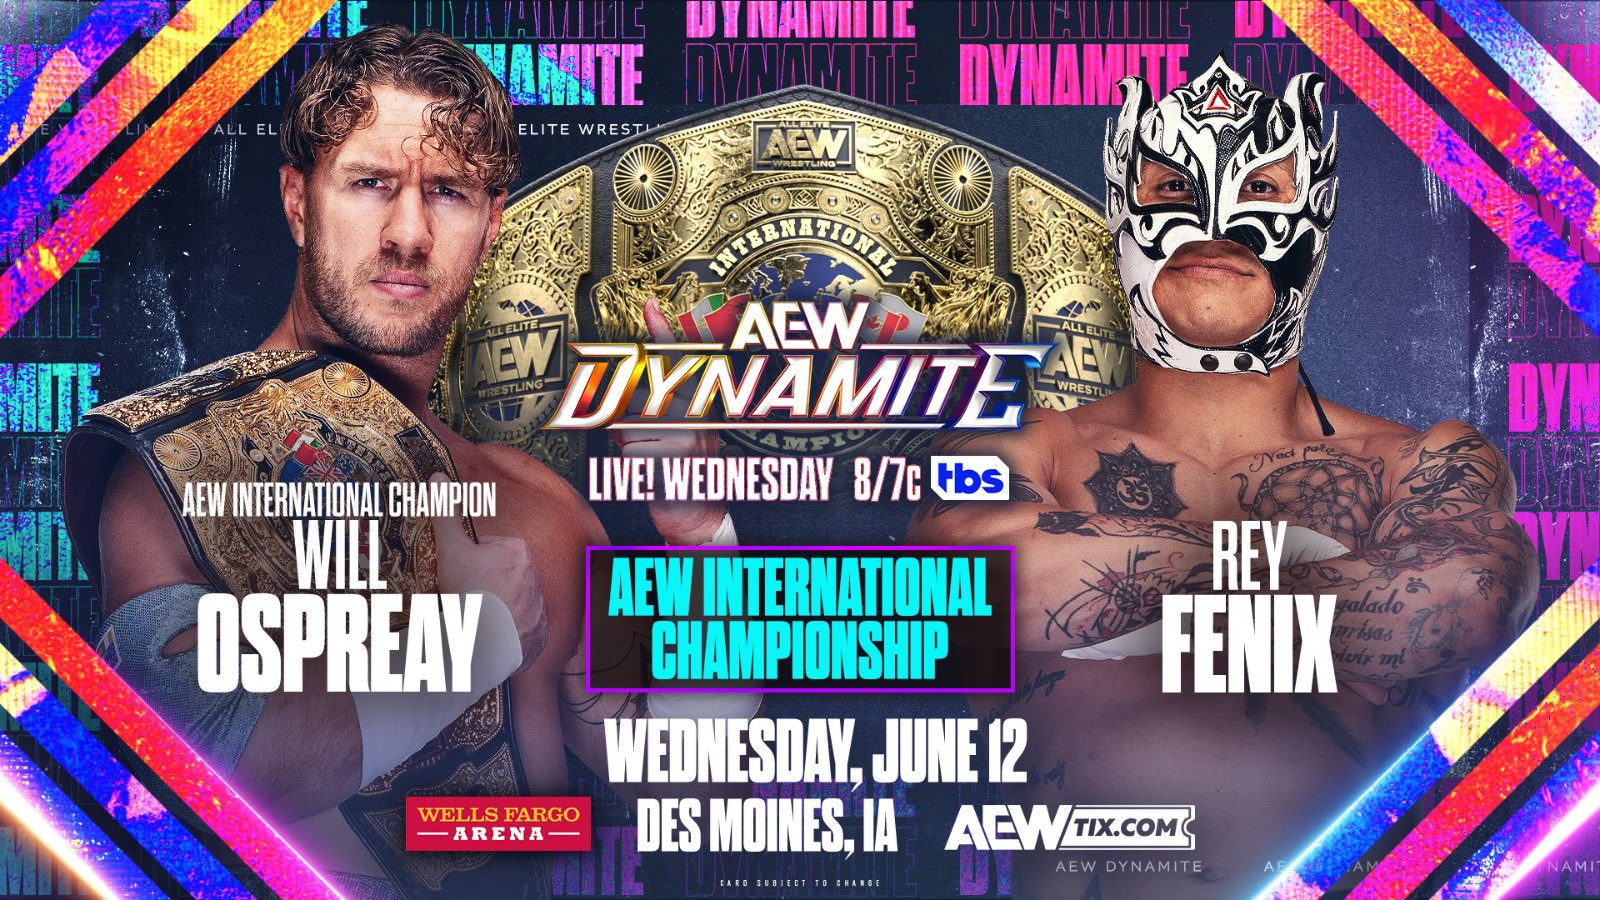 Advert for Championship Bout and Scheduled Television Broadcasting for the upcoming AEW Dynamite event.